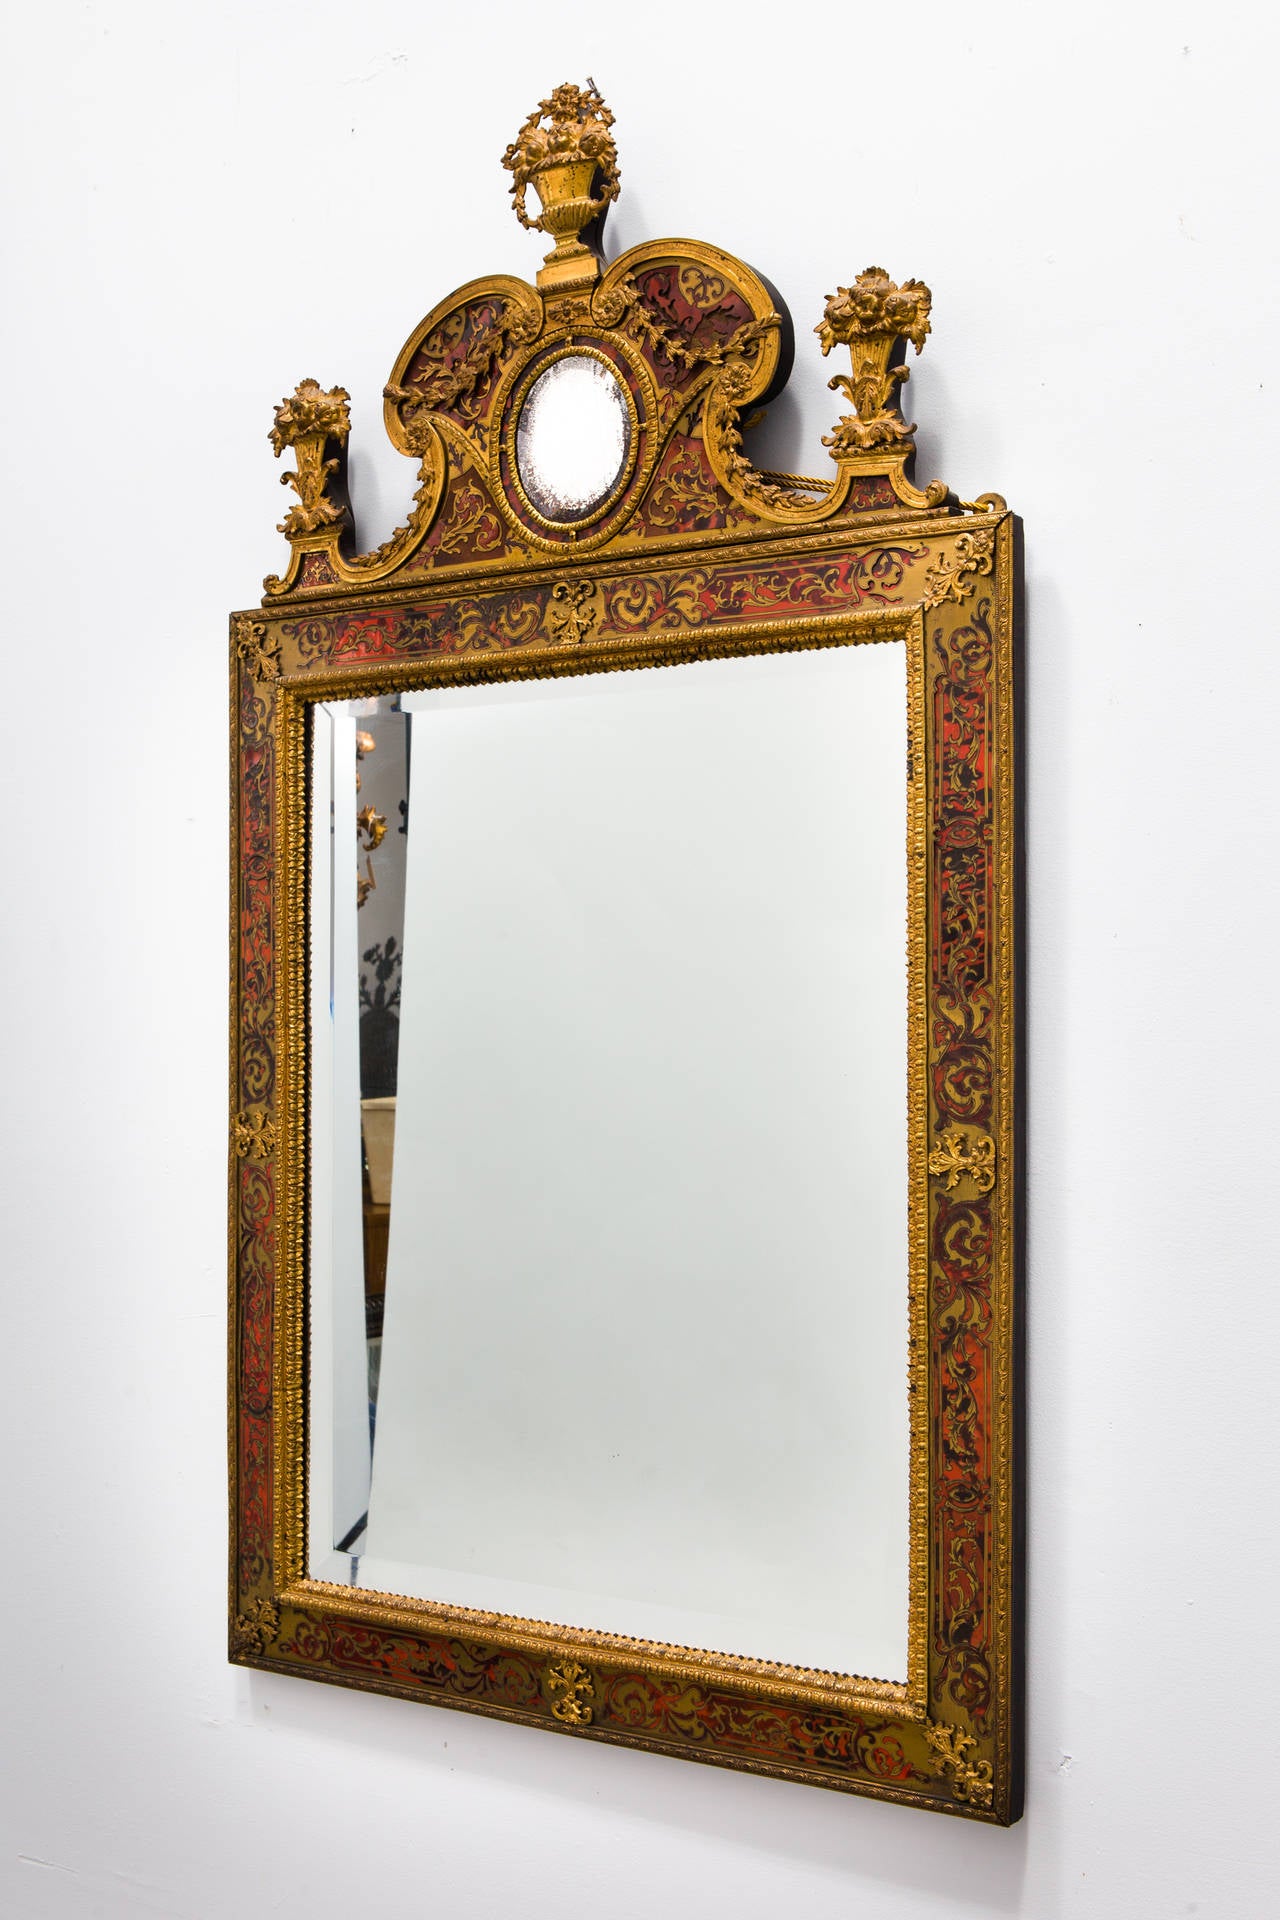 In the Louis XIV style, circa 1860. Rectangular beveled mirror with Boulle frame.

In 1999 the identical mirror sold at Christies in London for $ 7573.
In 2007, again the identical mirror sold at Christies New York for $8125.